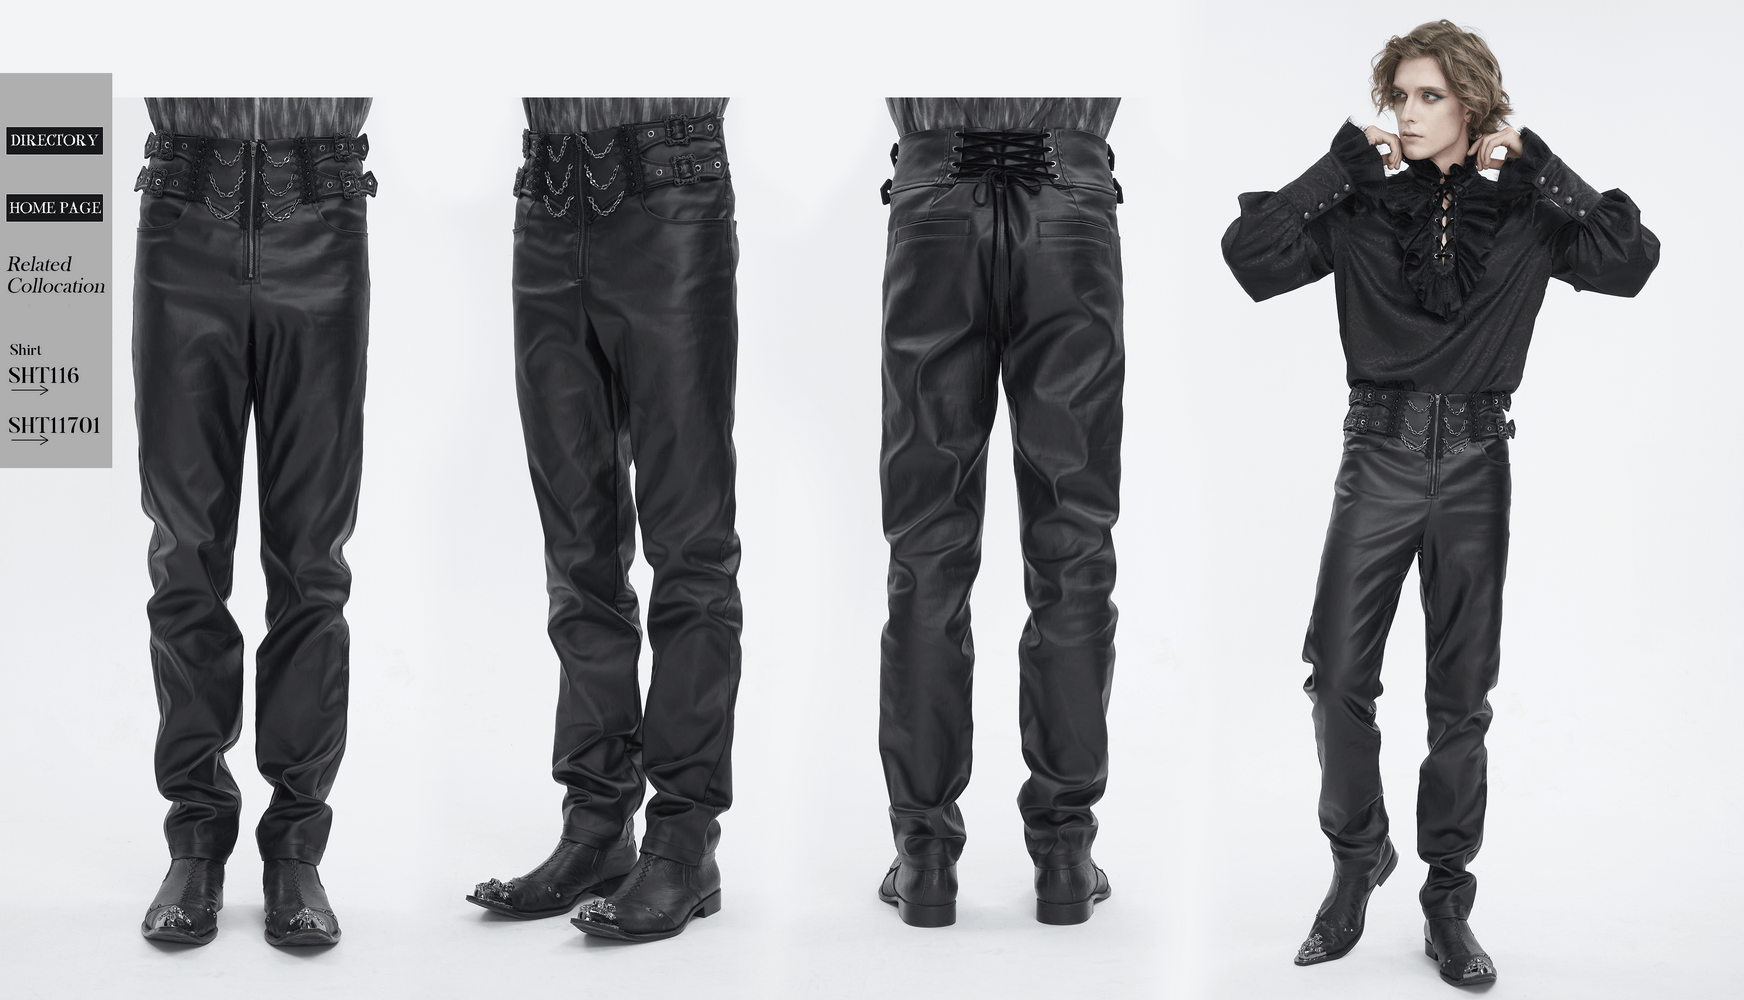 Edgy Black Male Zippered Pants with Buckles Waistband